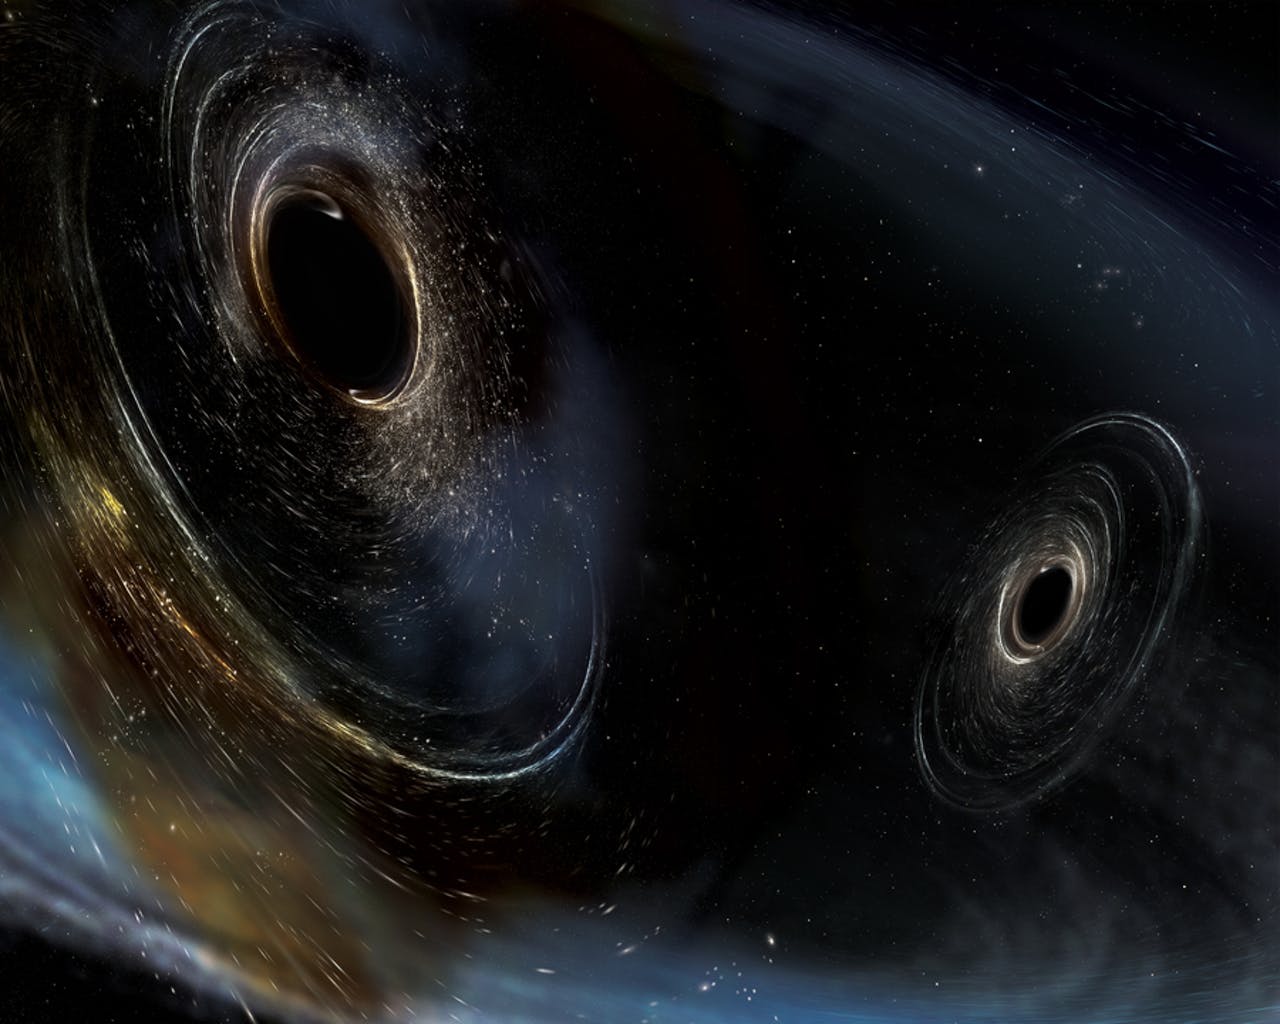 Artist's conception shows two merging black holes similar to those discovered by LIGO